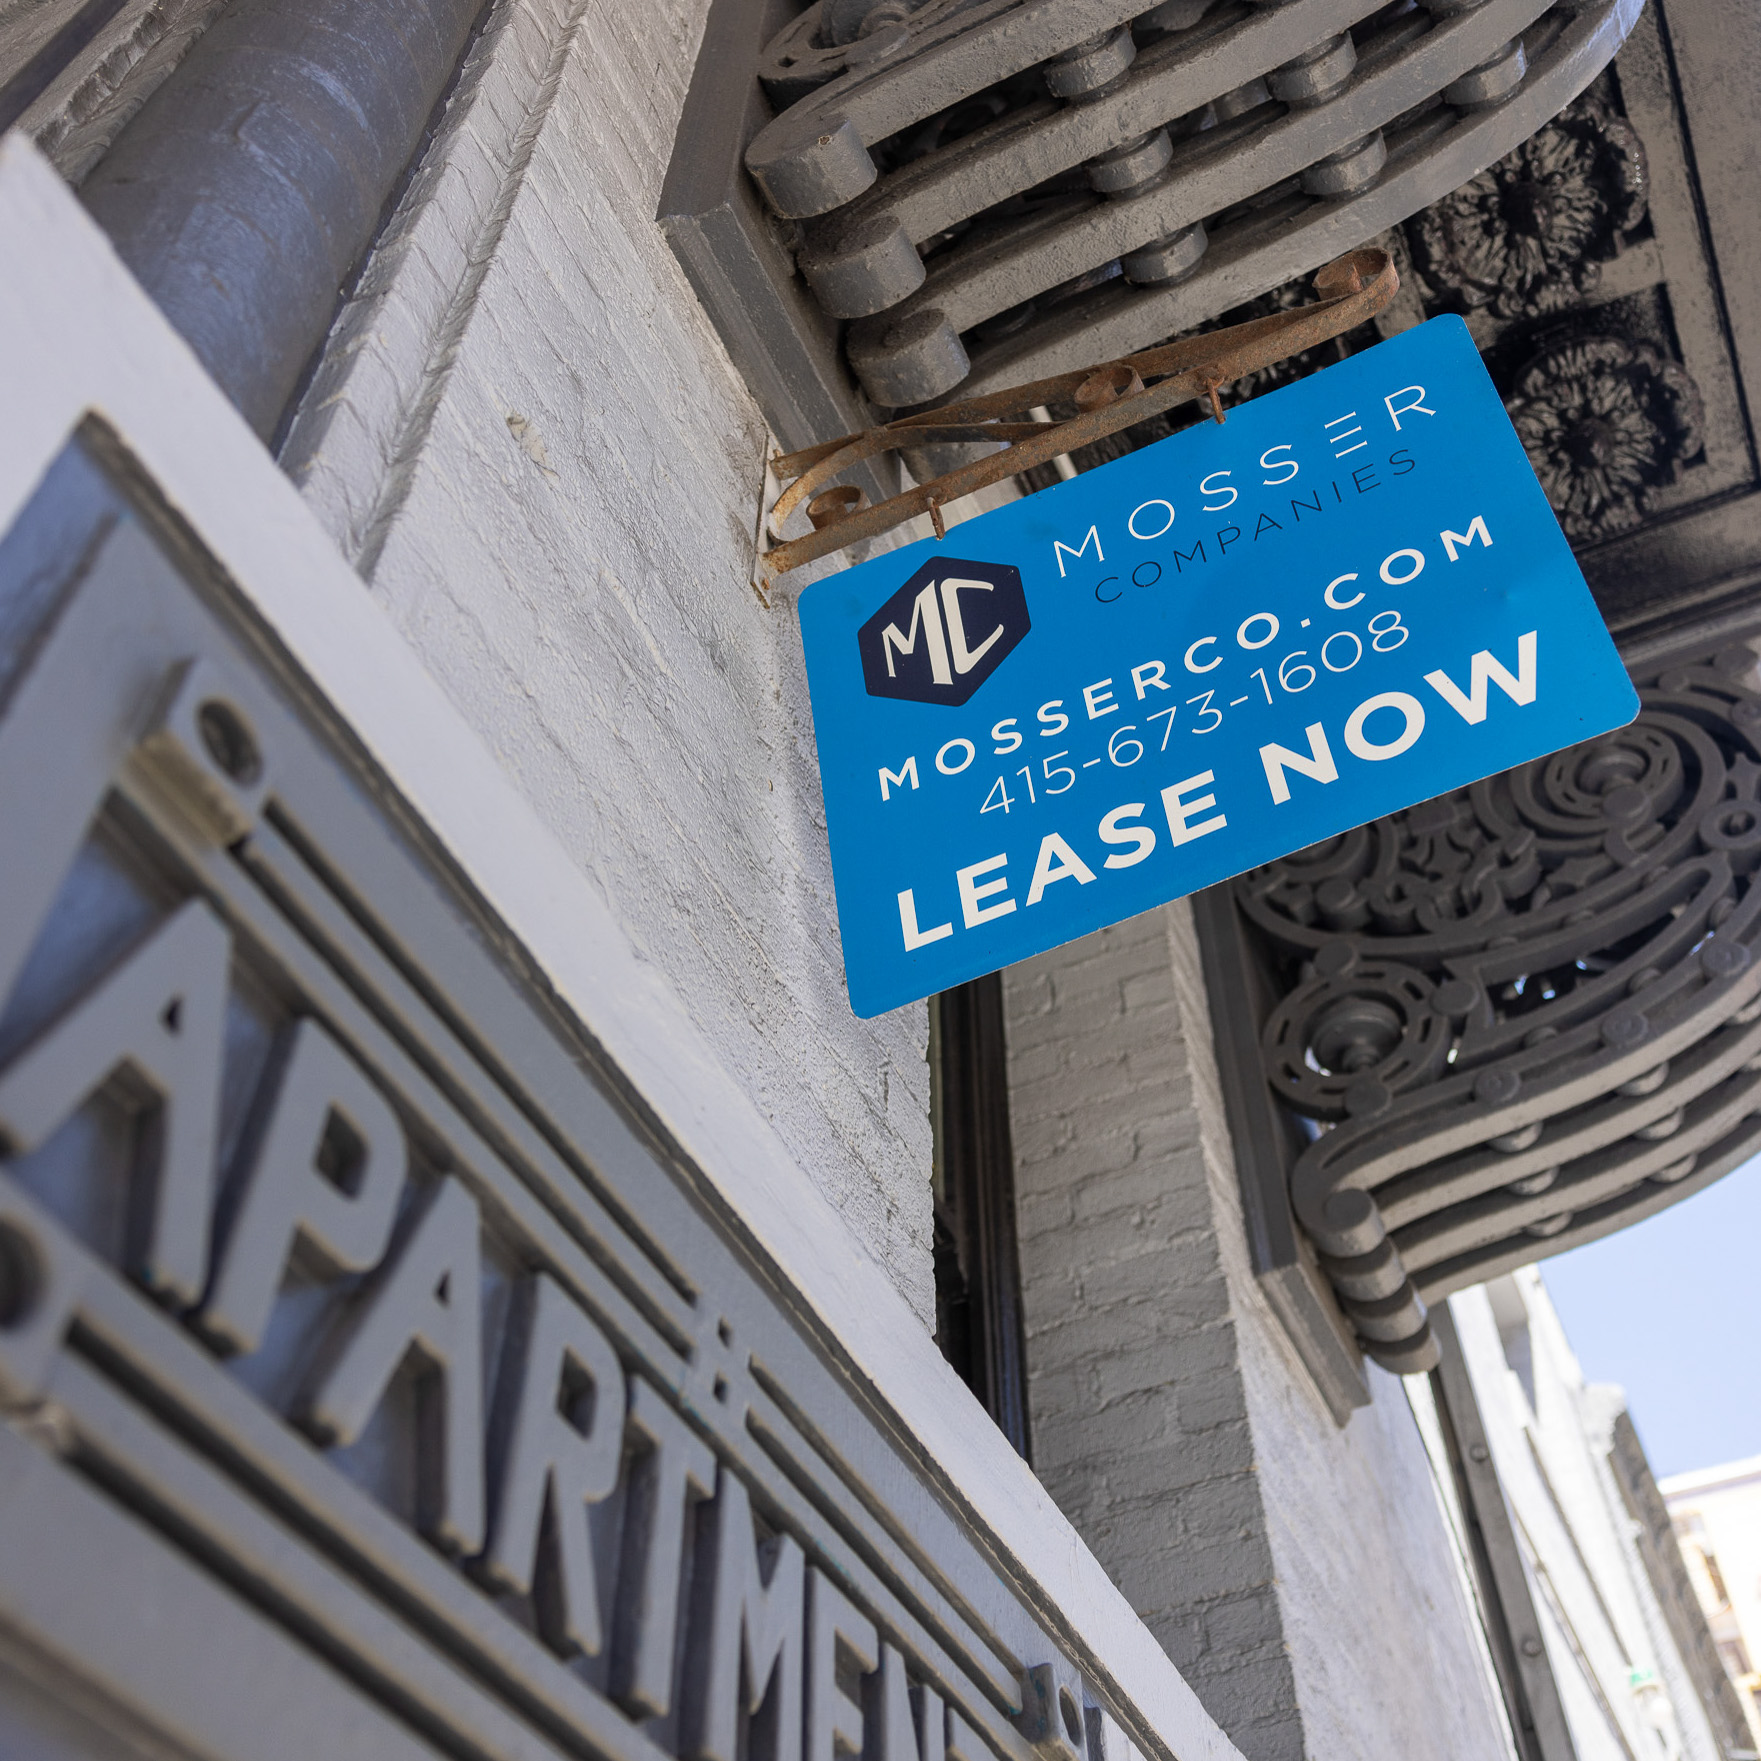 A blue sign attached to a building reads &quot;Mosser Companies&quot; with their web address, phone number, and &quot;Lease Now.&quot; The perspective shows ornate structural details and part of a sign saying &quot;Apartment.&quot;